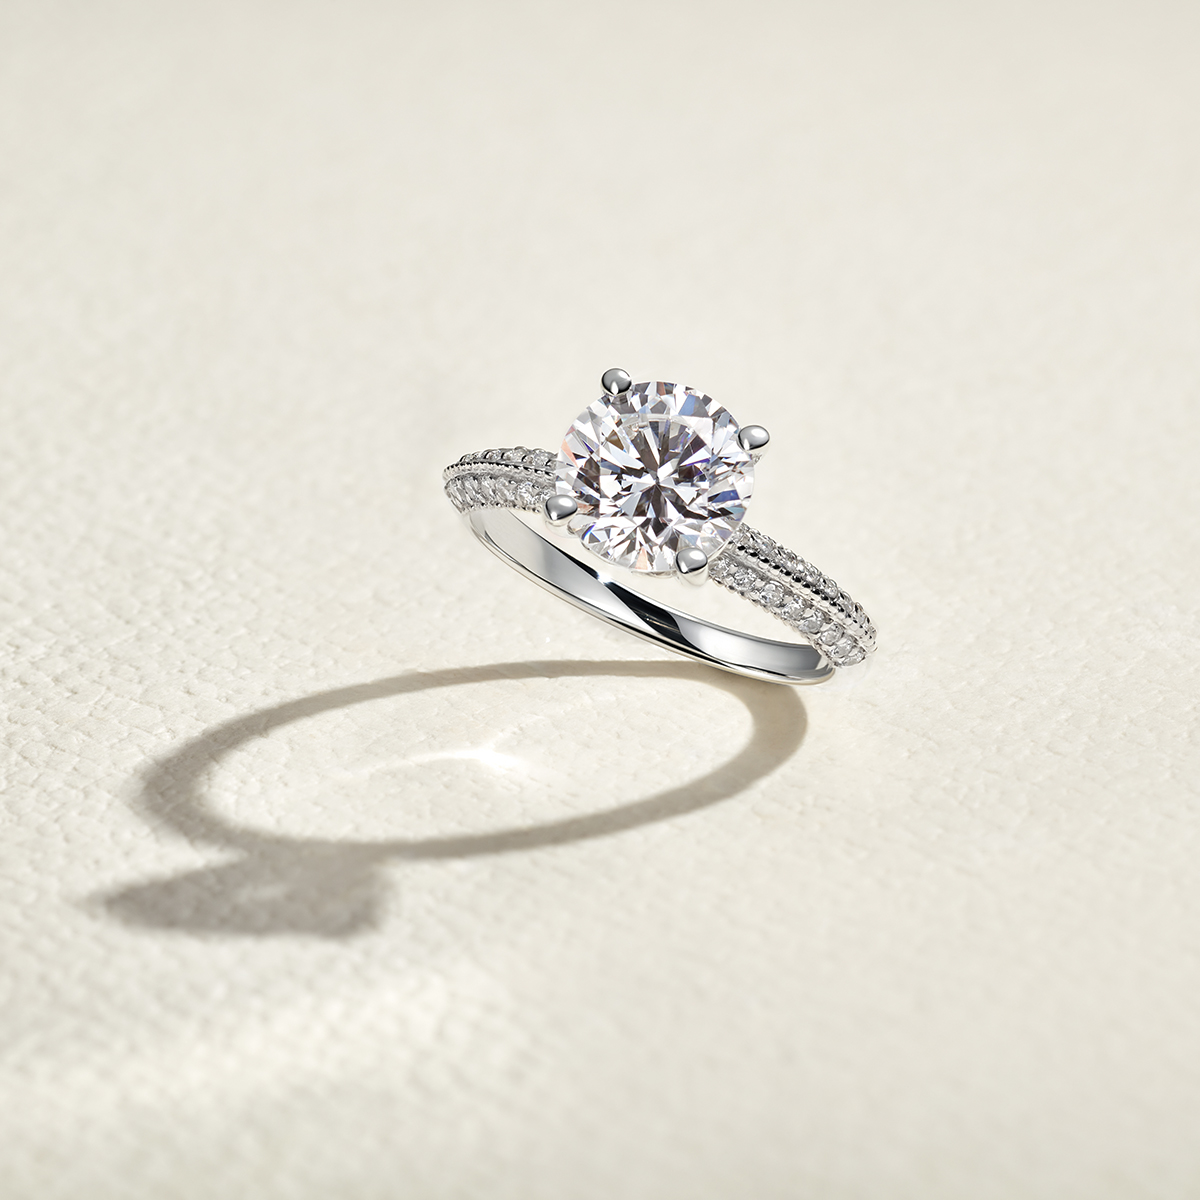 Pave Engagement Rings – With Clarity